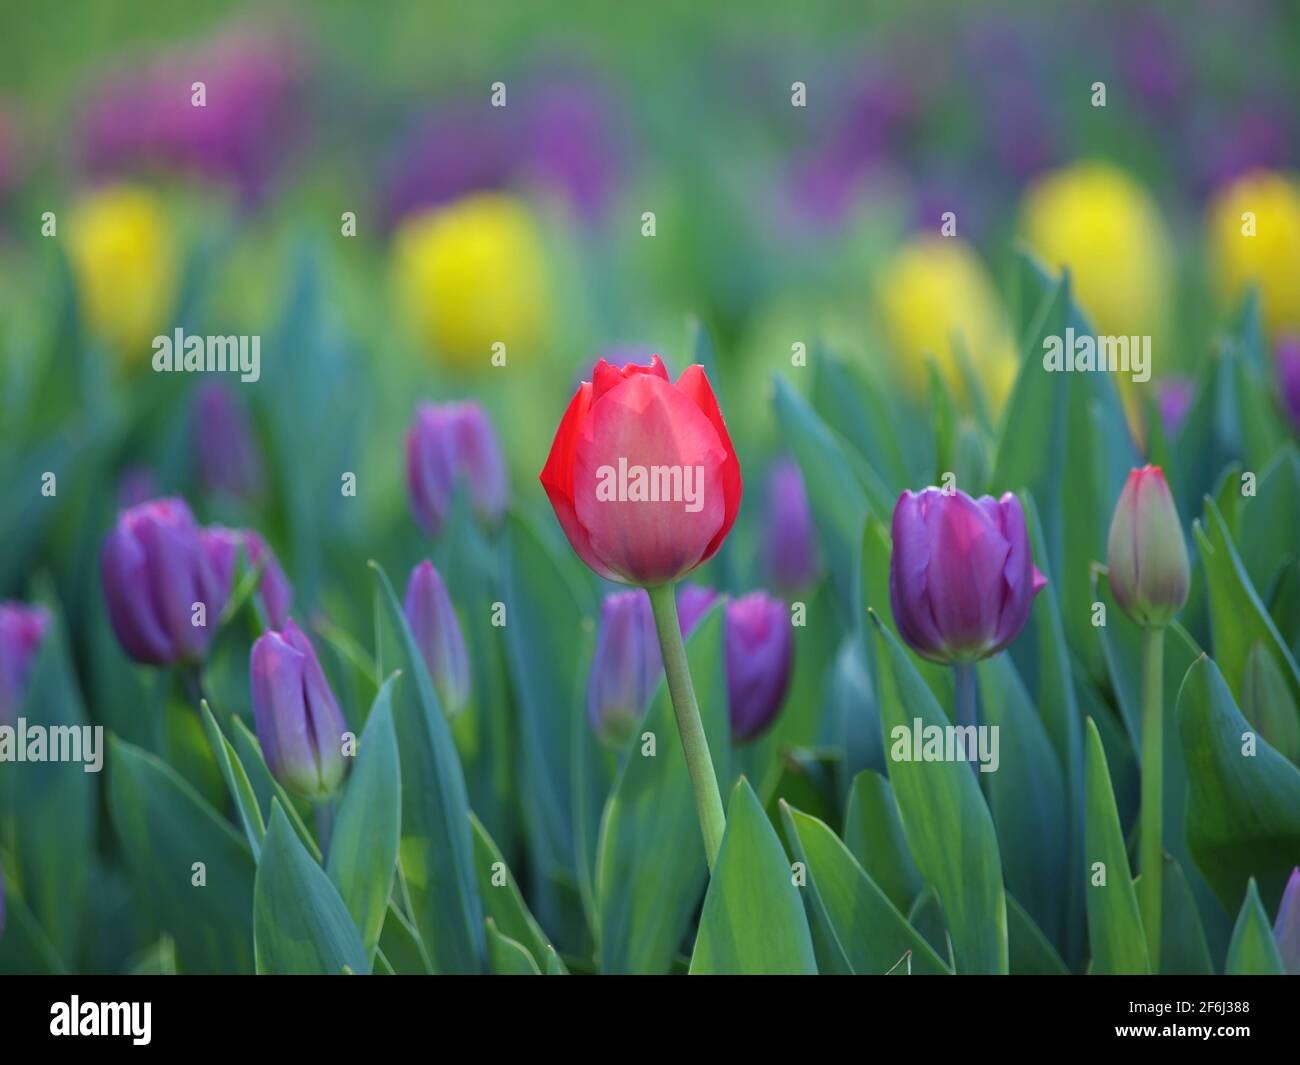 Lonely red tulip among purple and yellow. Bright flowers background. Stock Photo